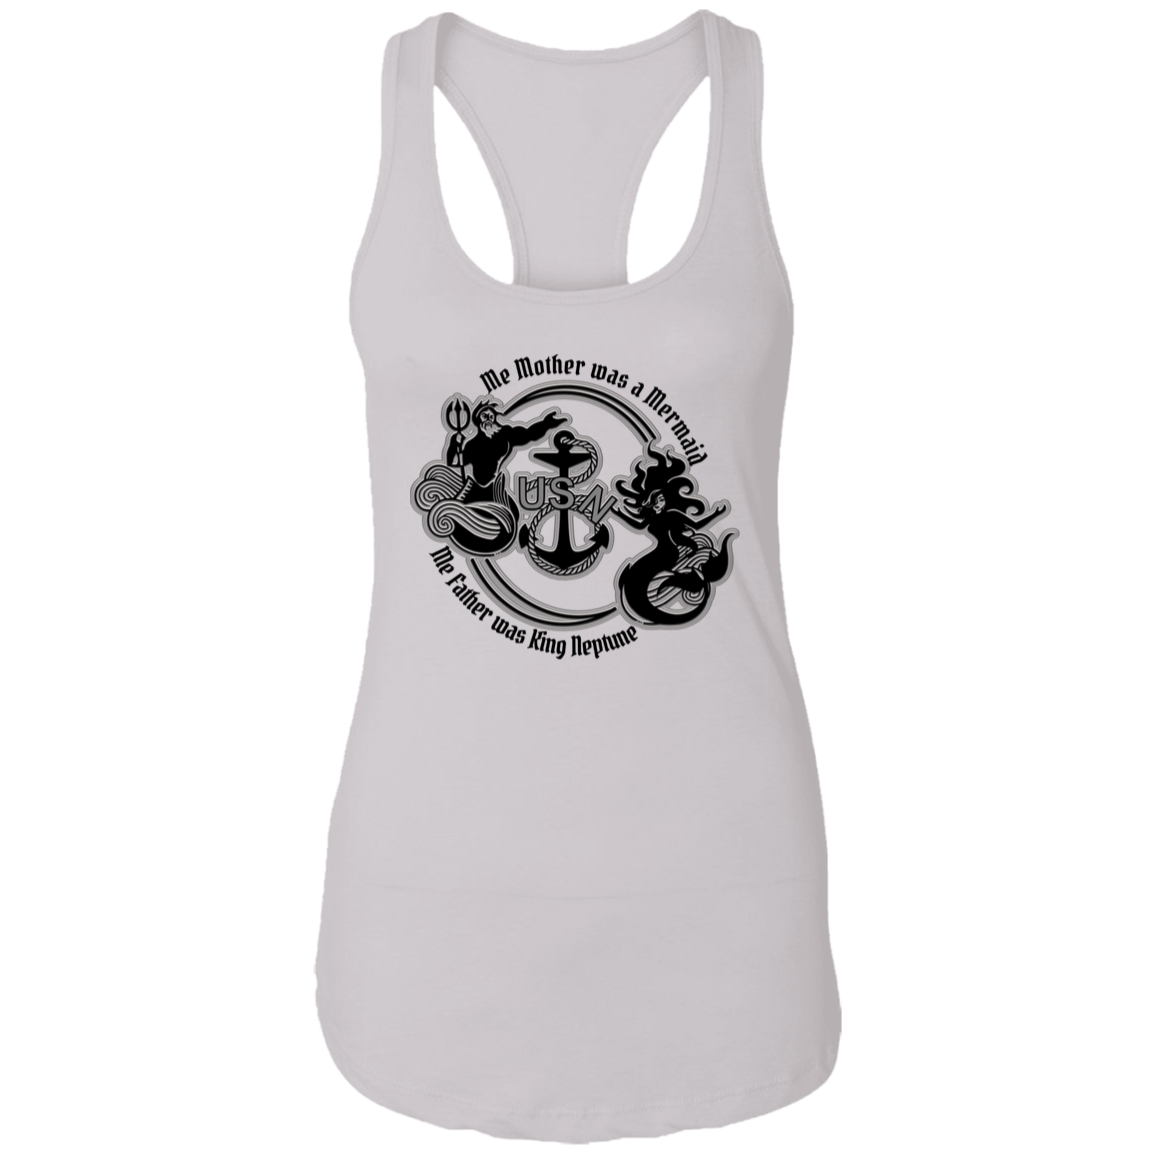 Me Mother and Father Ladies Racerback Tank